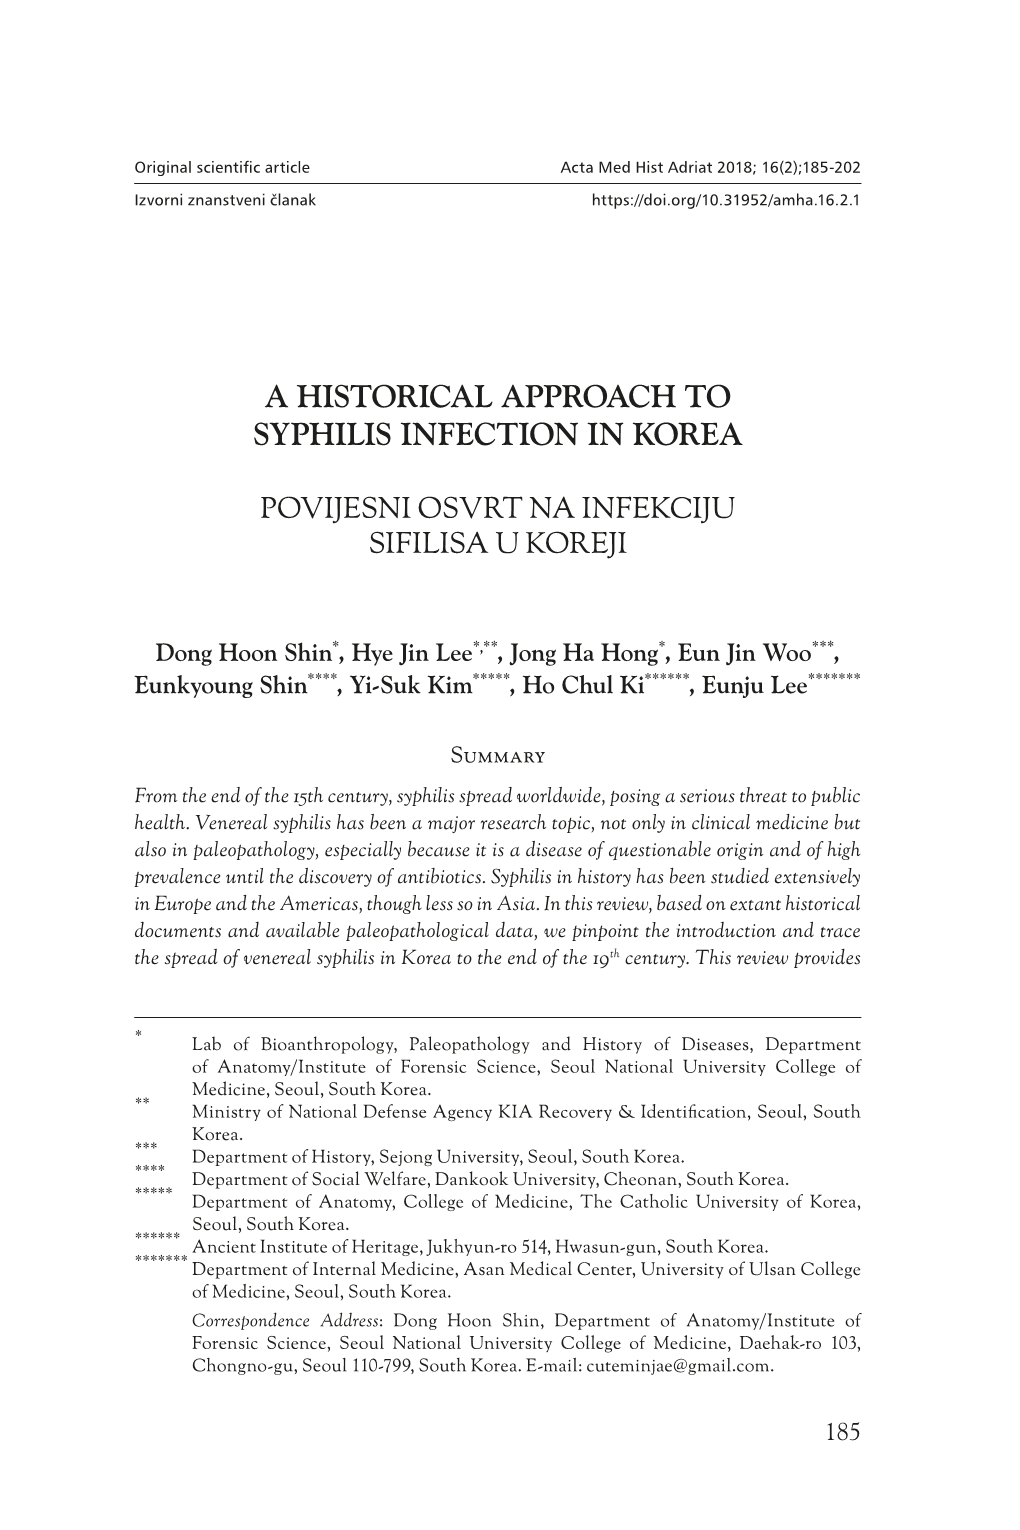 A Historical Approach to Syphilis Infection in Korea